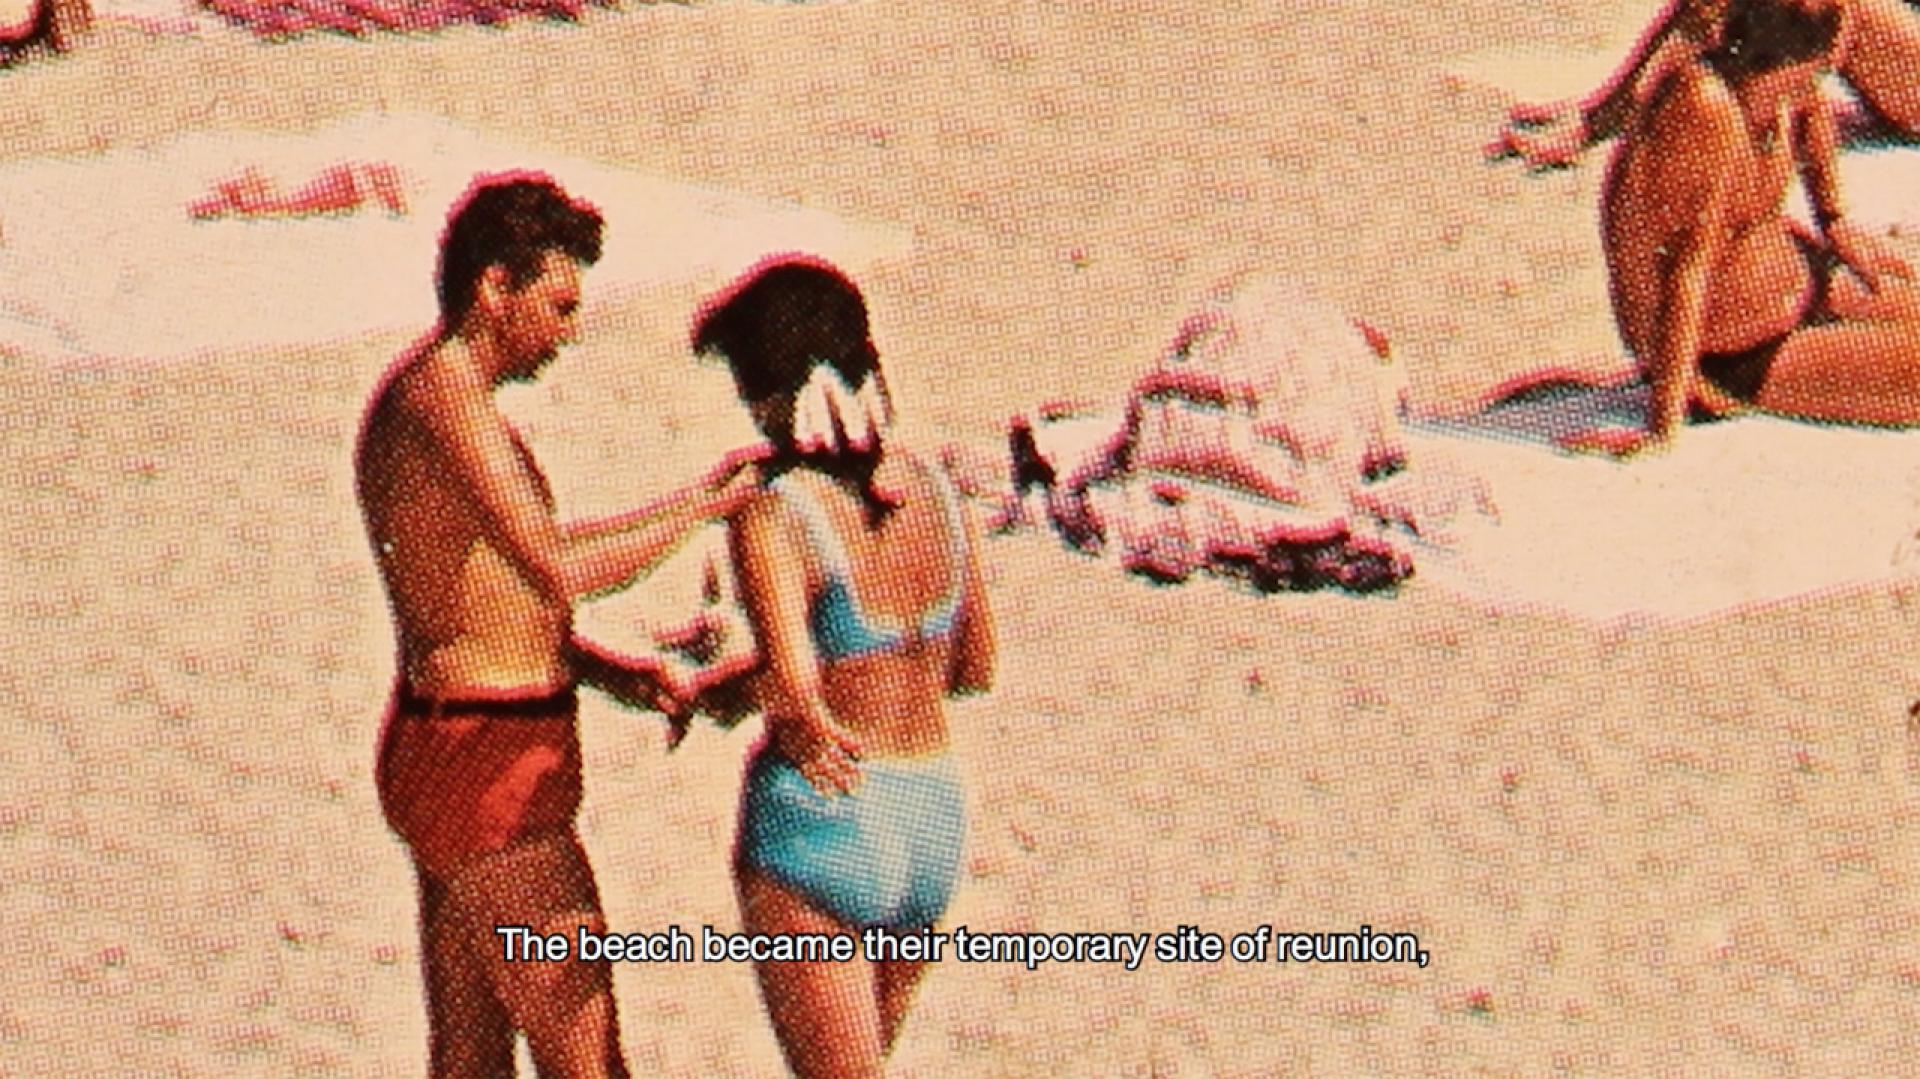 Enlarging the pixels is like looking through the cracks of the perfect image in order to find the traces of the actual truth — behind the general beach euphoria, individual dramas depict a different reality.